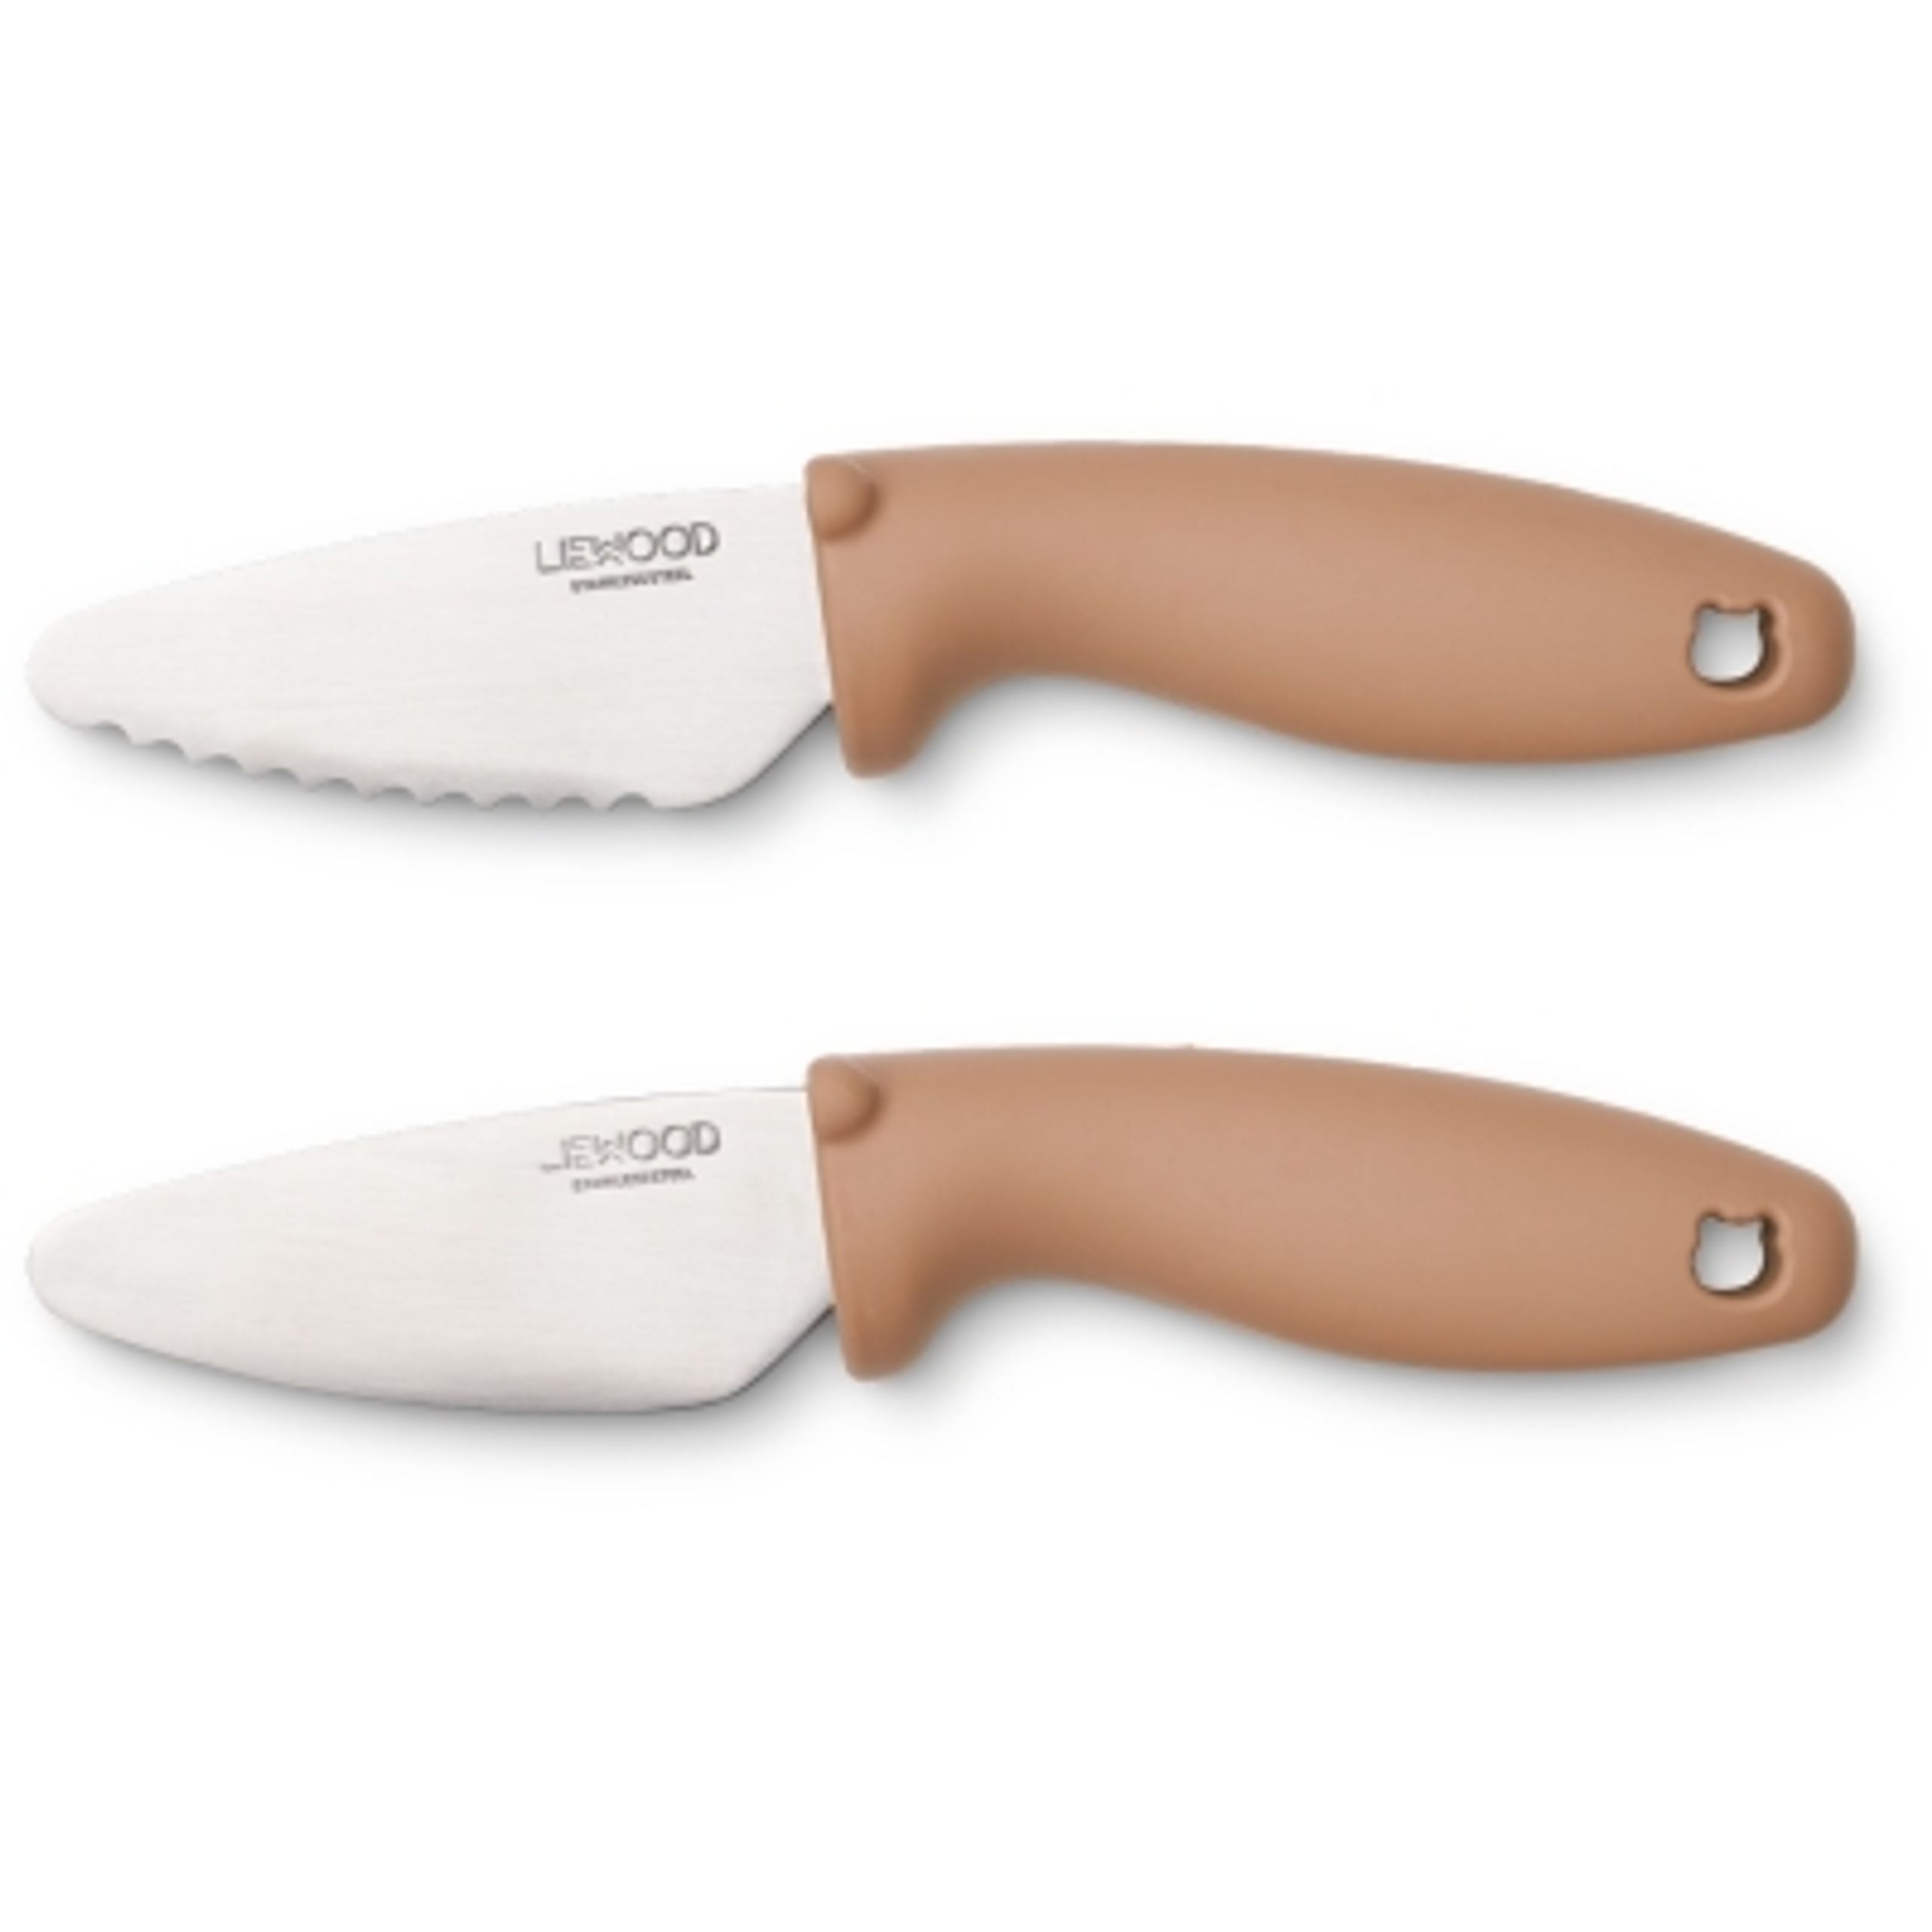 LIEWOOD - Messer - Perry Cutting Knife Set - 2074 Tuscany Rose